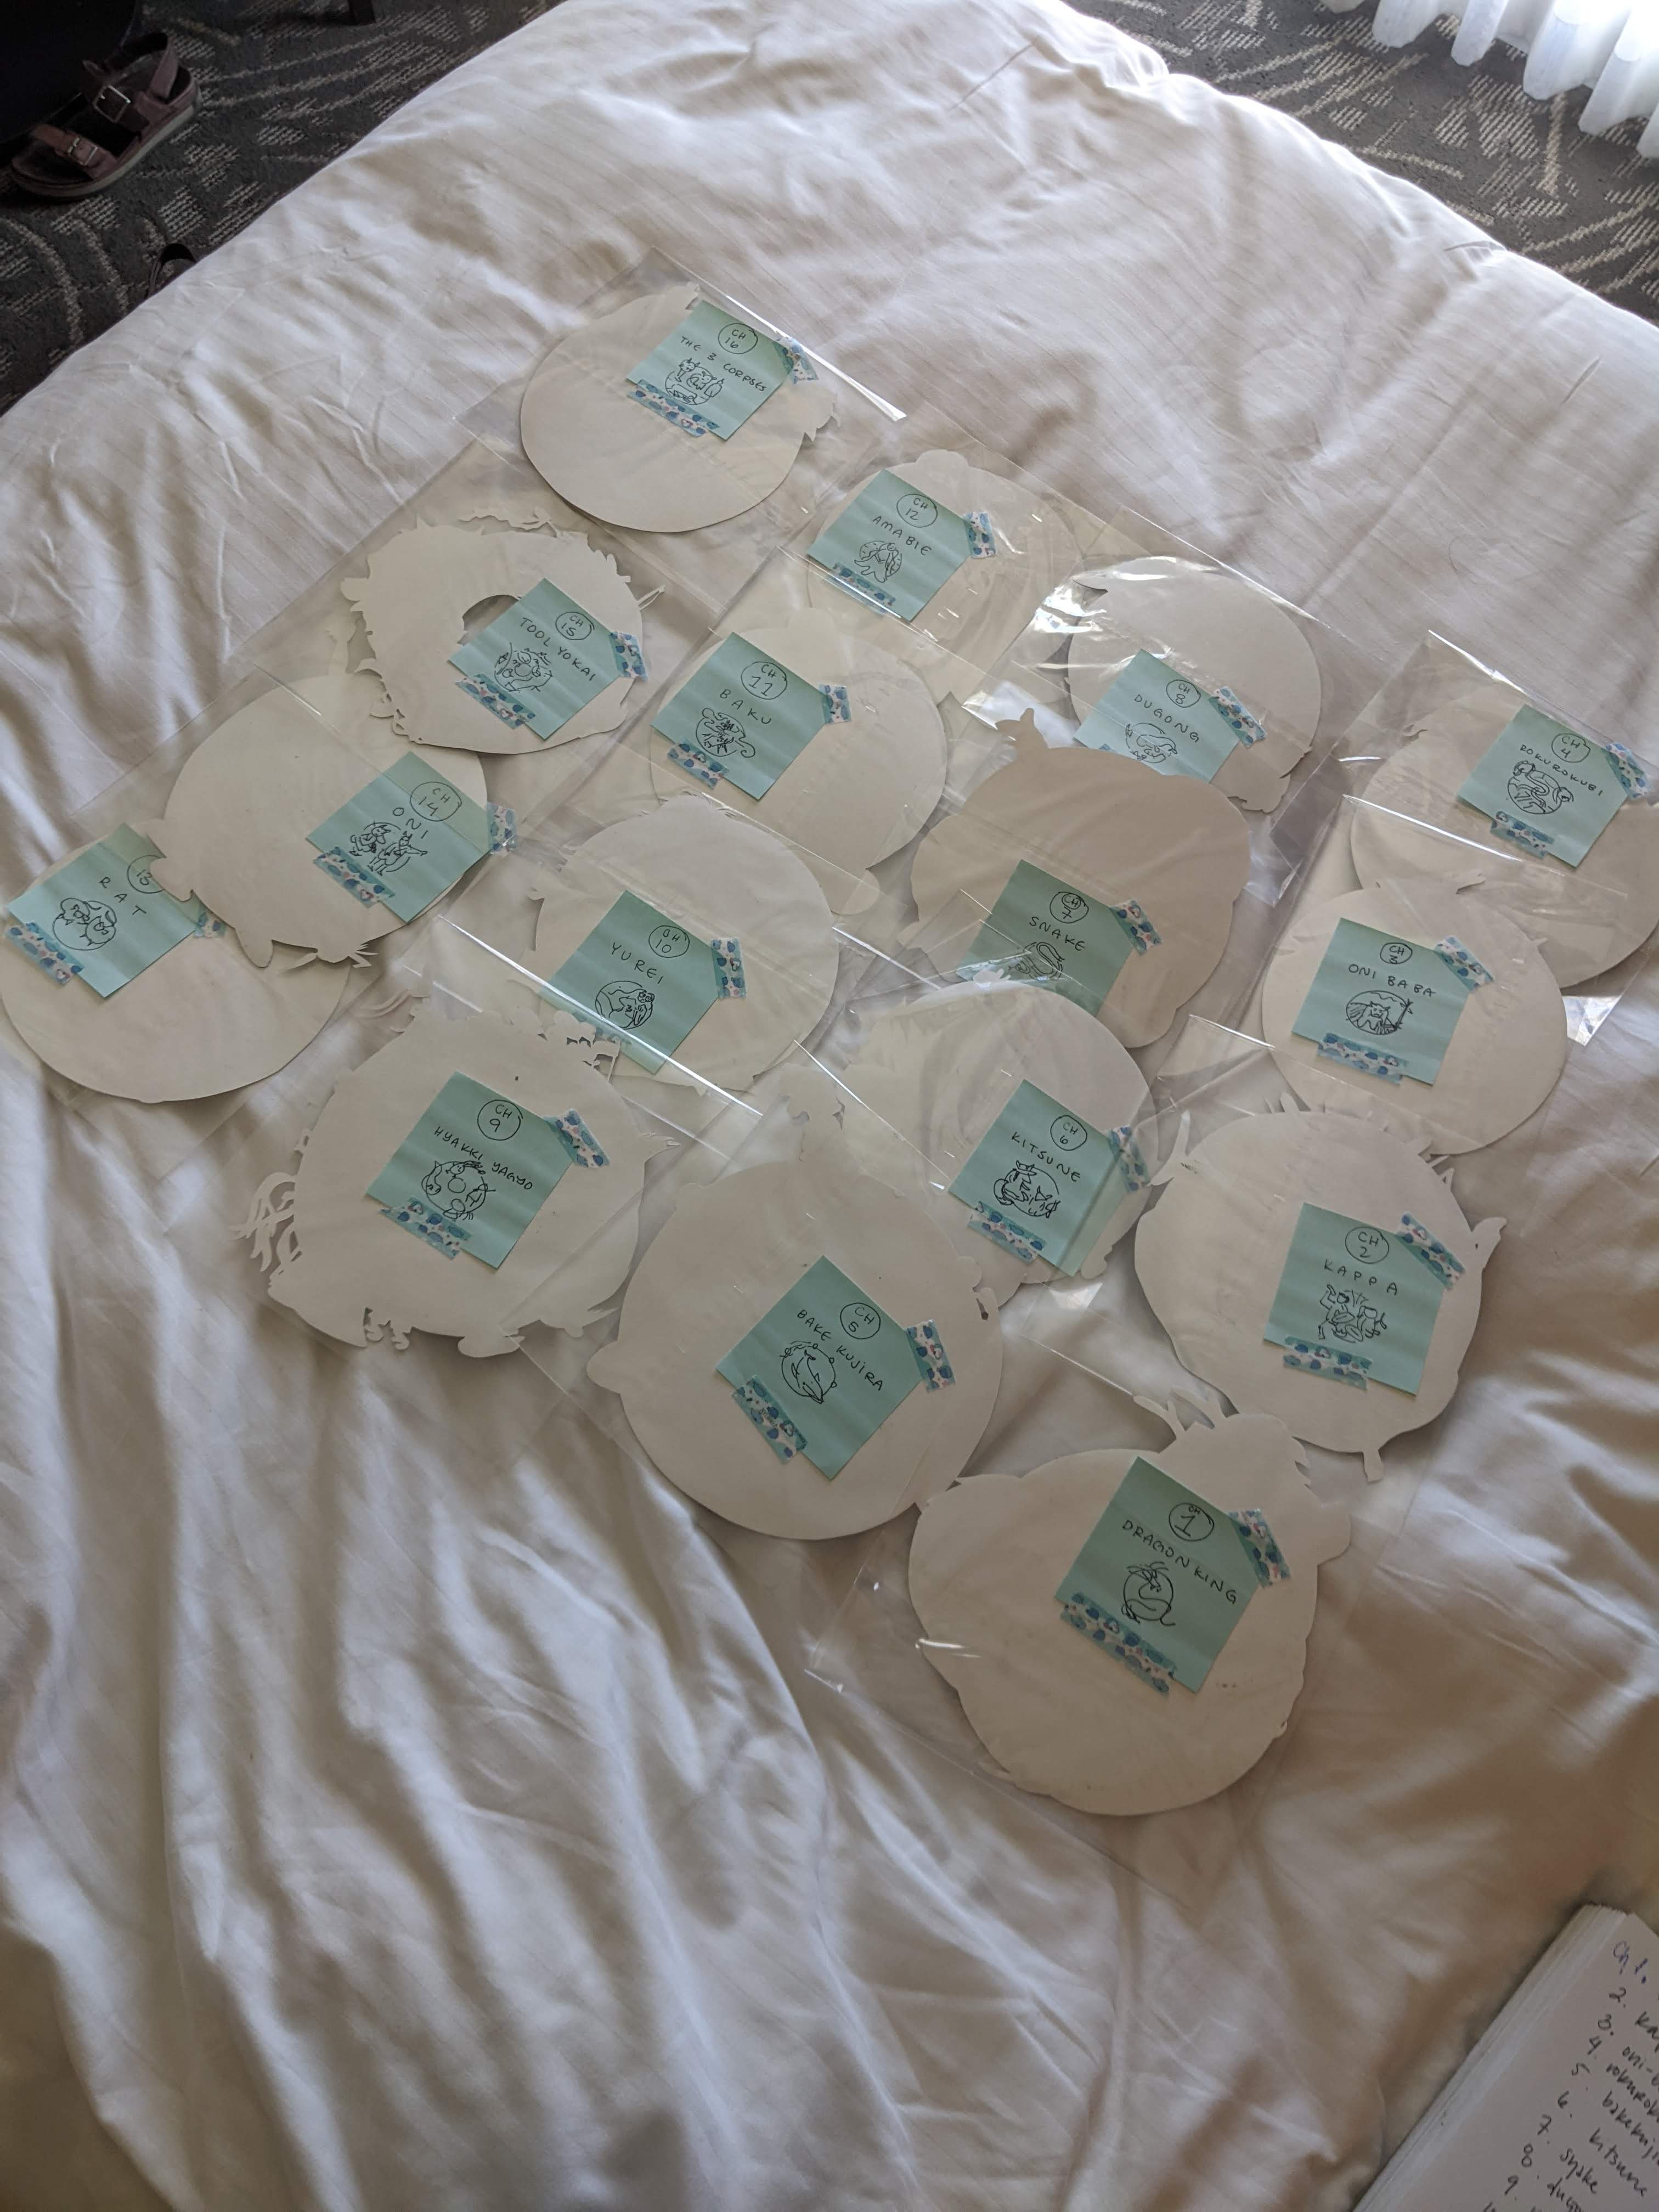 picture of 16 circular paintings wrapped in plastic, lying on a white bed